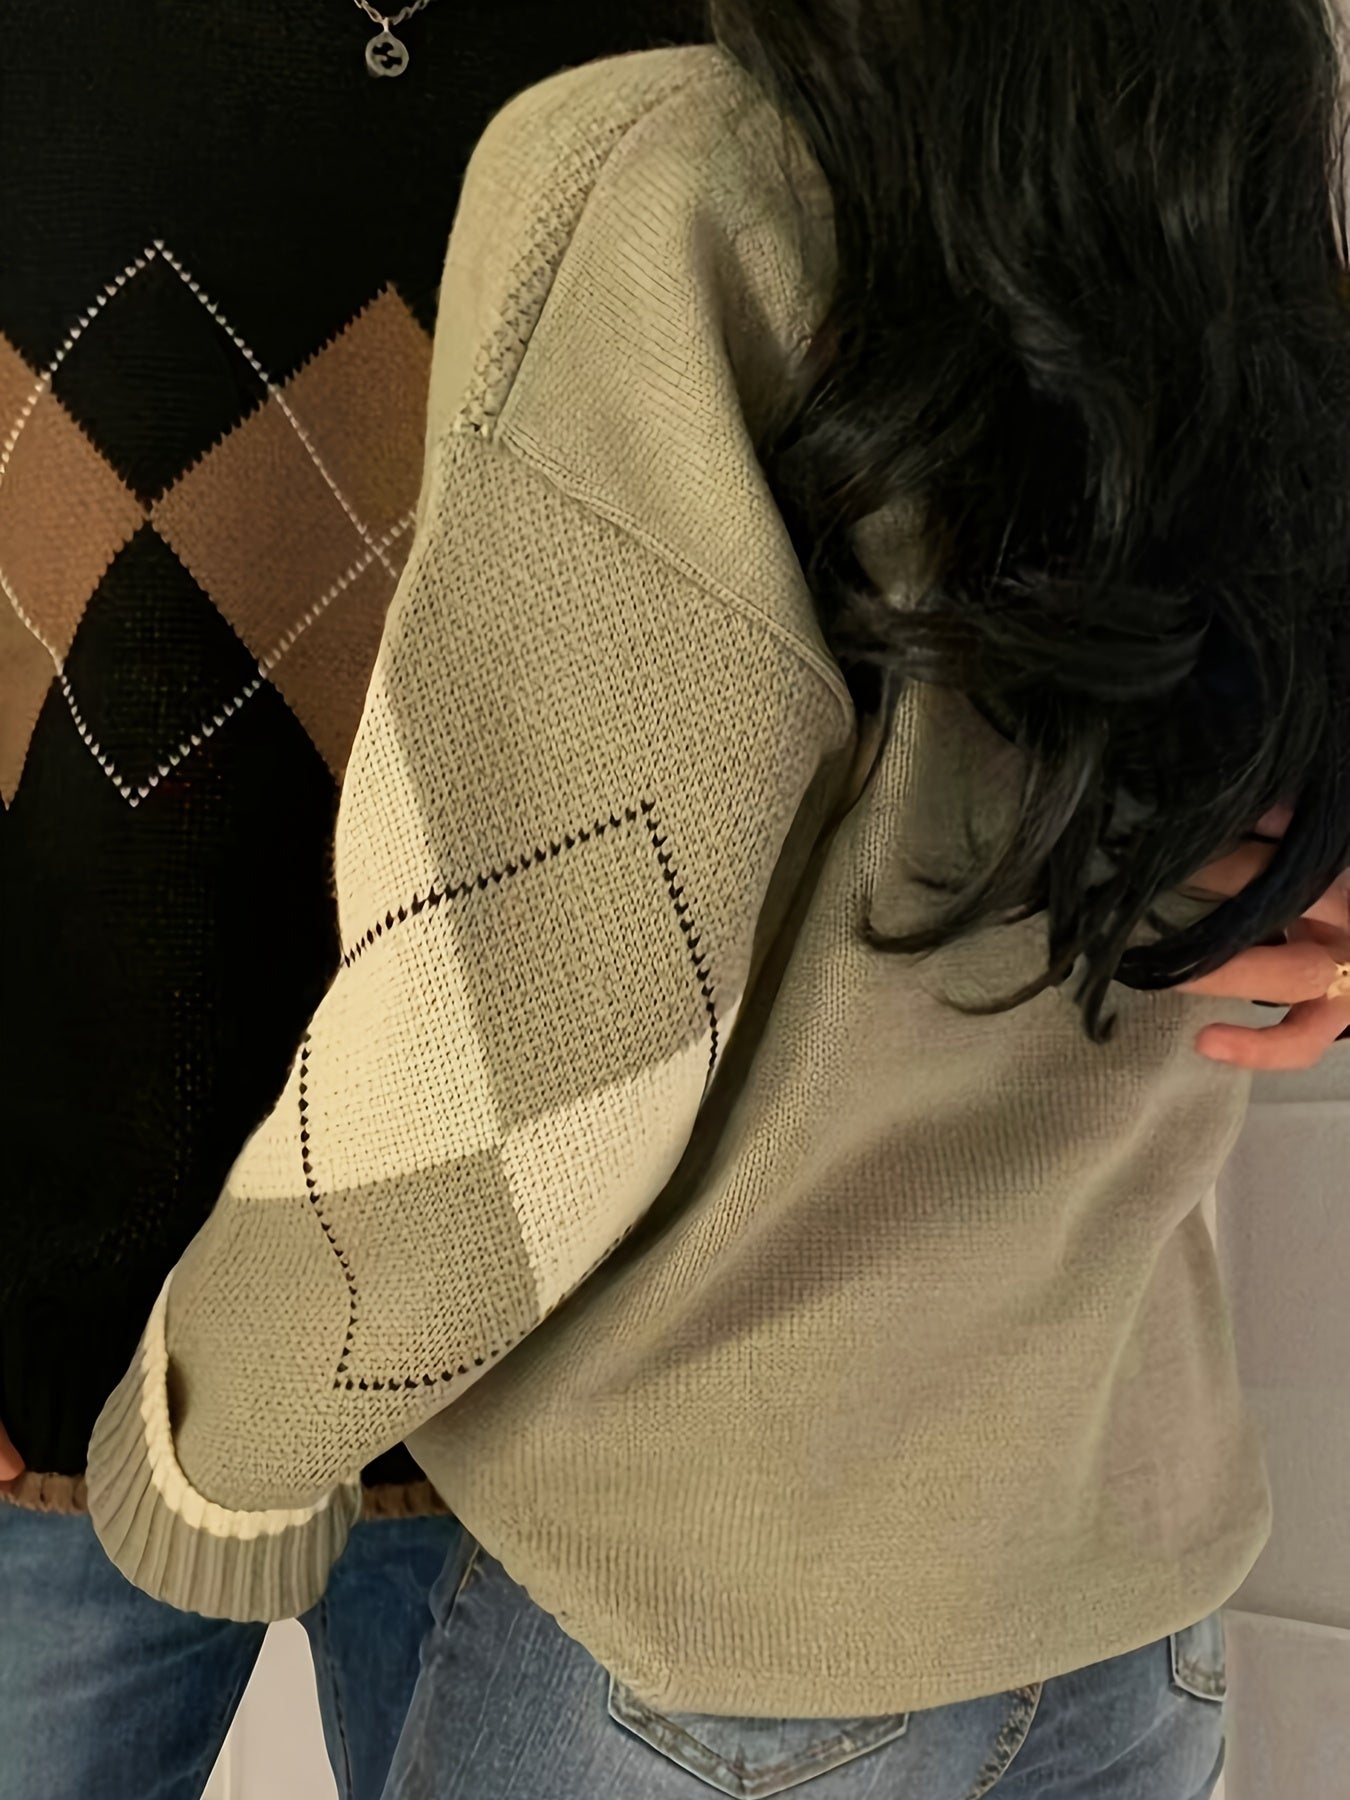 vlovelaw  Argyle Pattern Crew Neck Pullover Sweater, Vintage Long Sleeve Loose Sweater, Women's Clothing